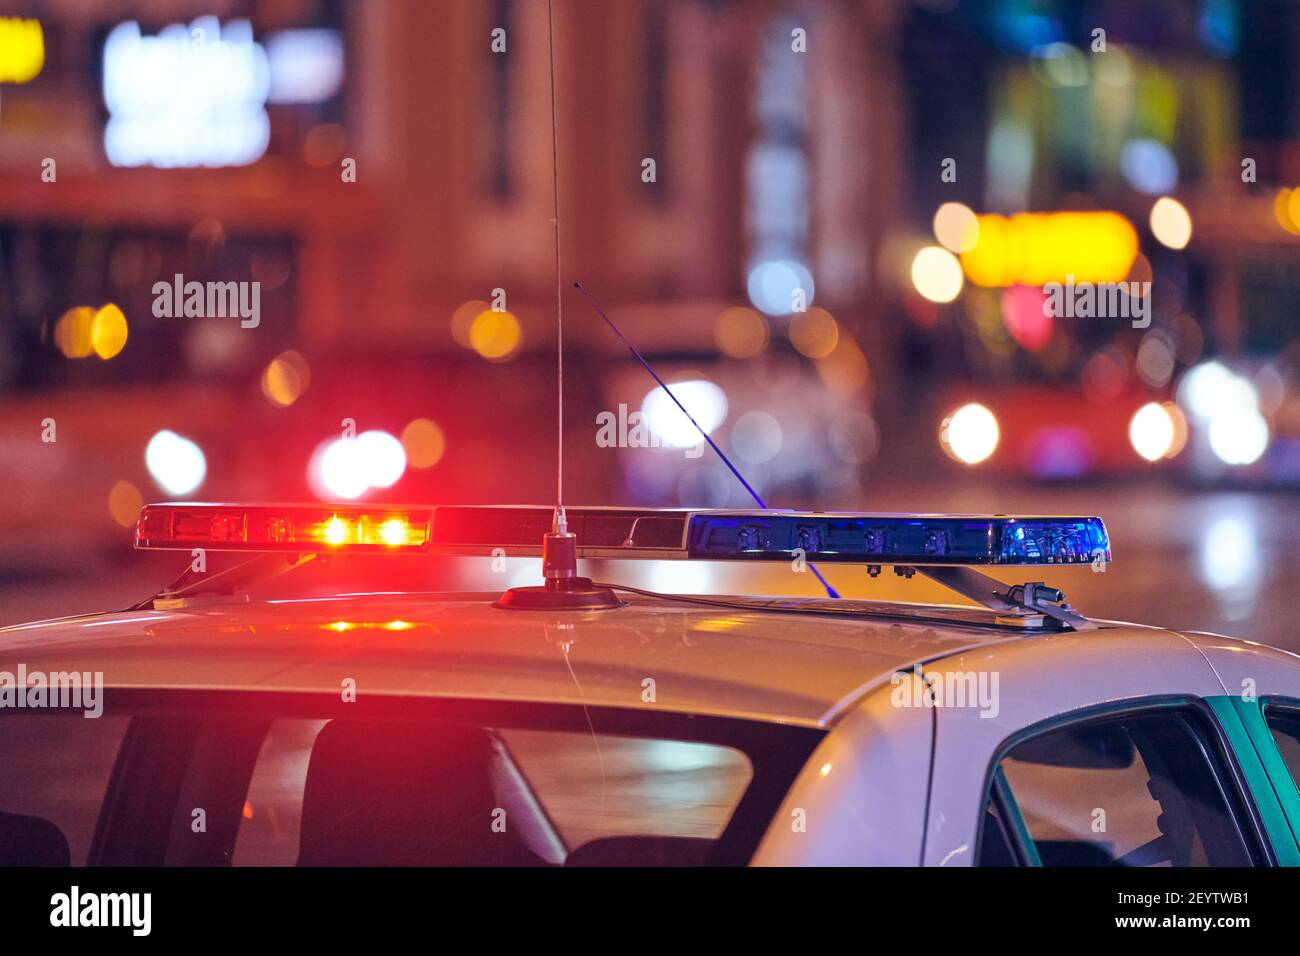 Police car lights at night city street. Red and blue lights. Road traffic accident. Evening patrolling Stock Photo